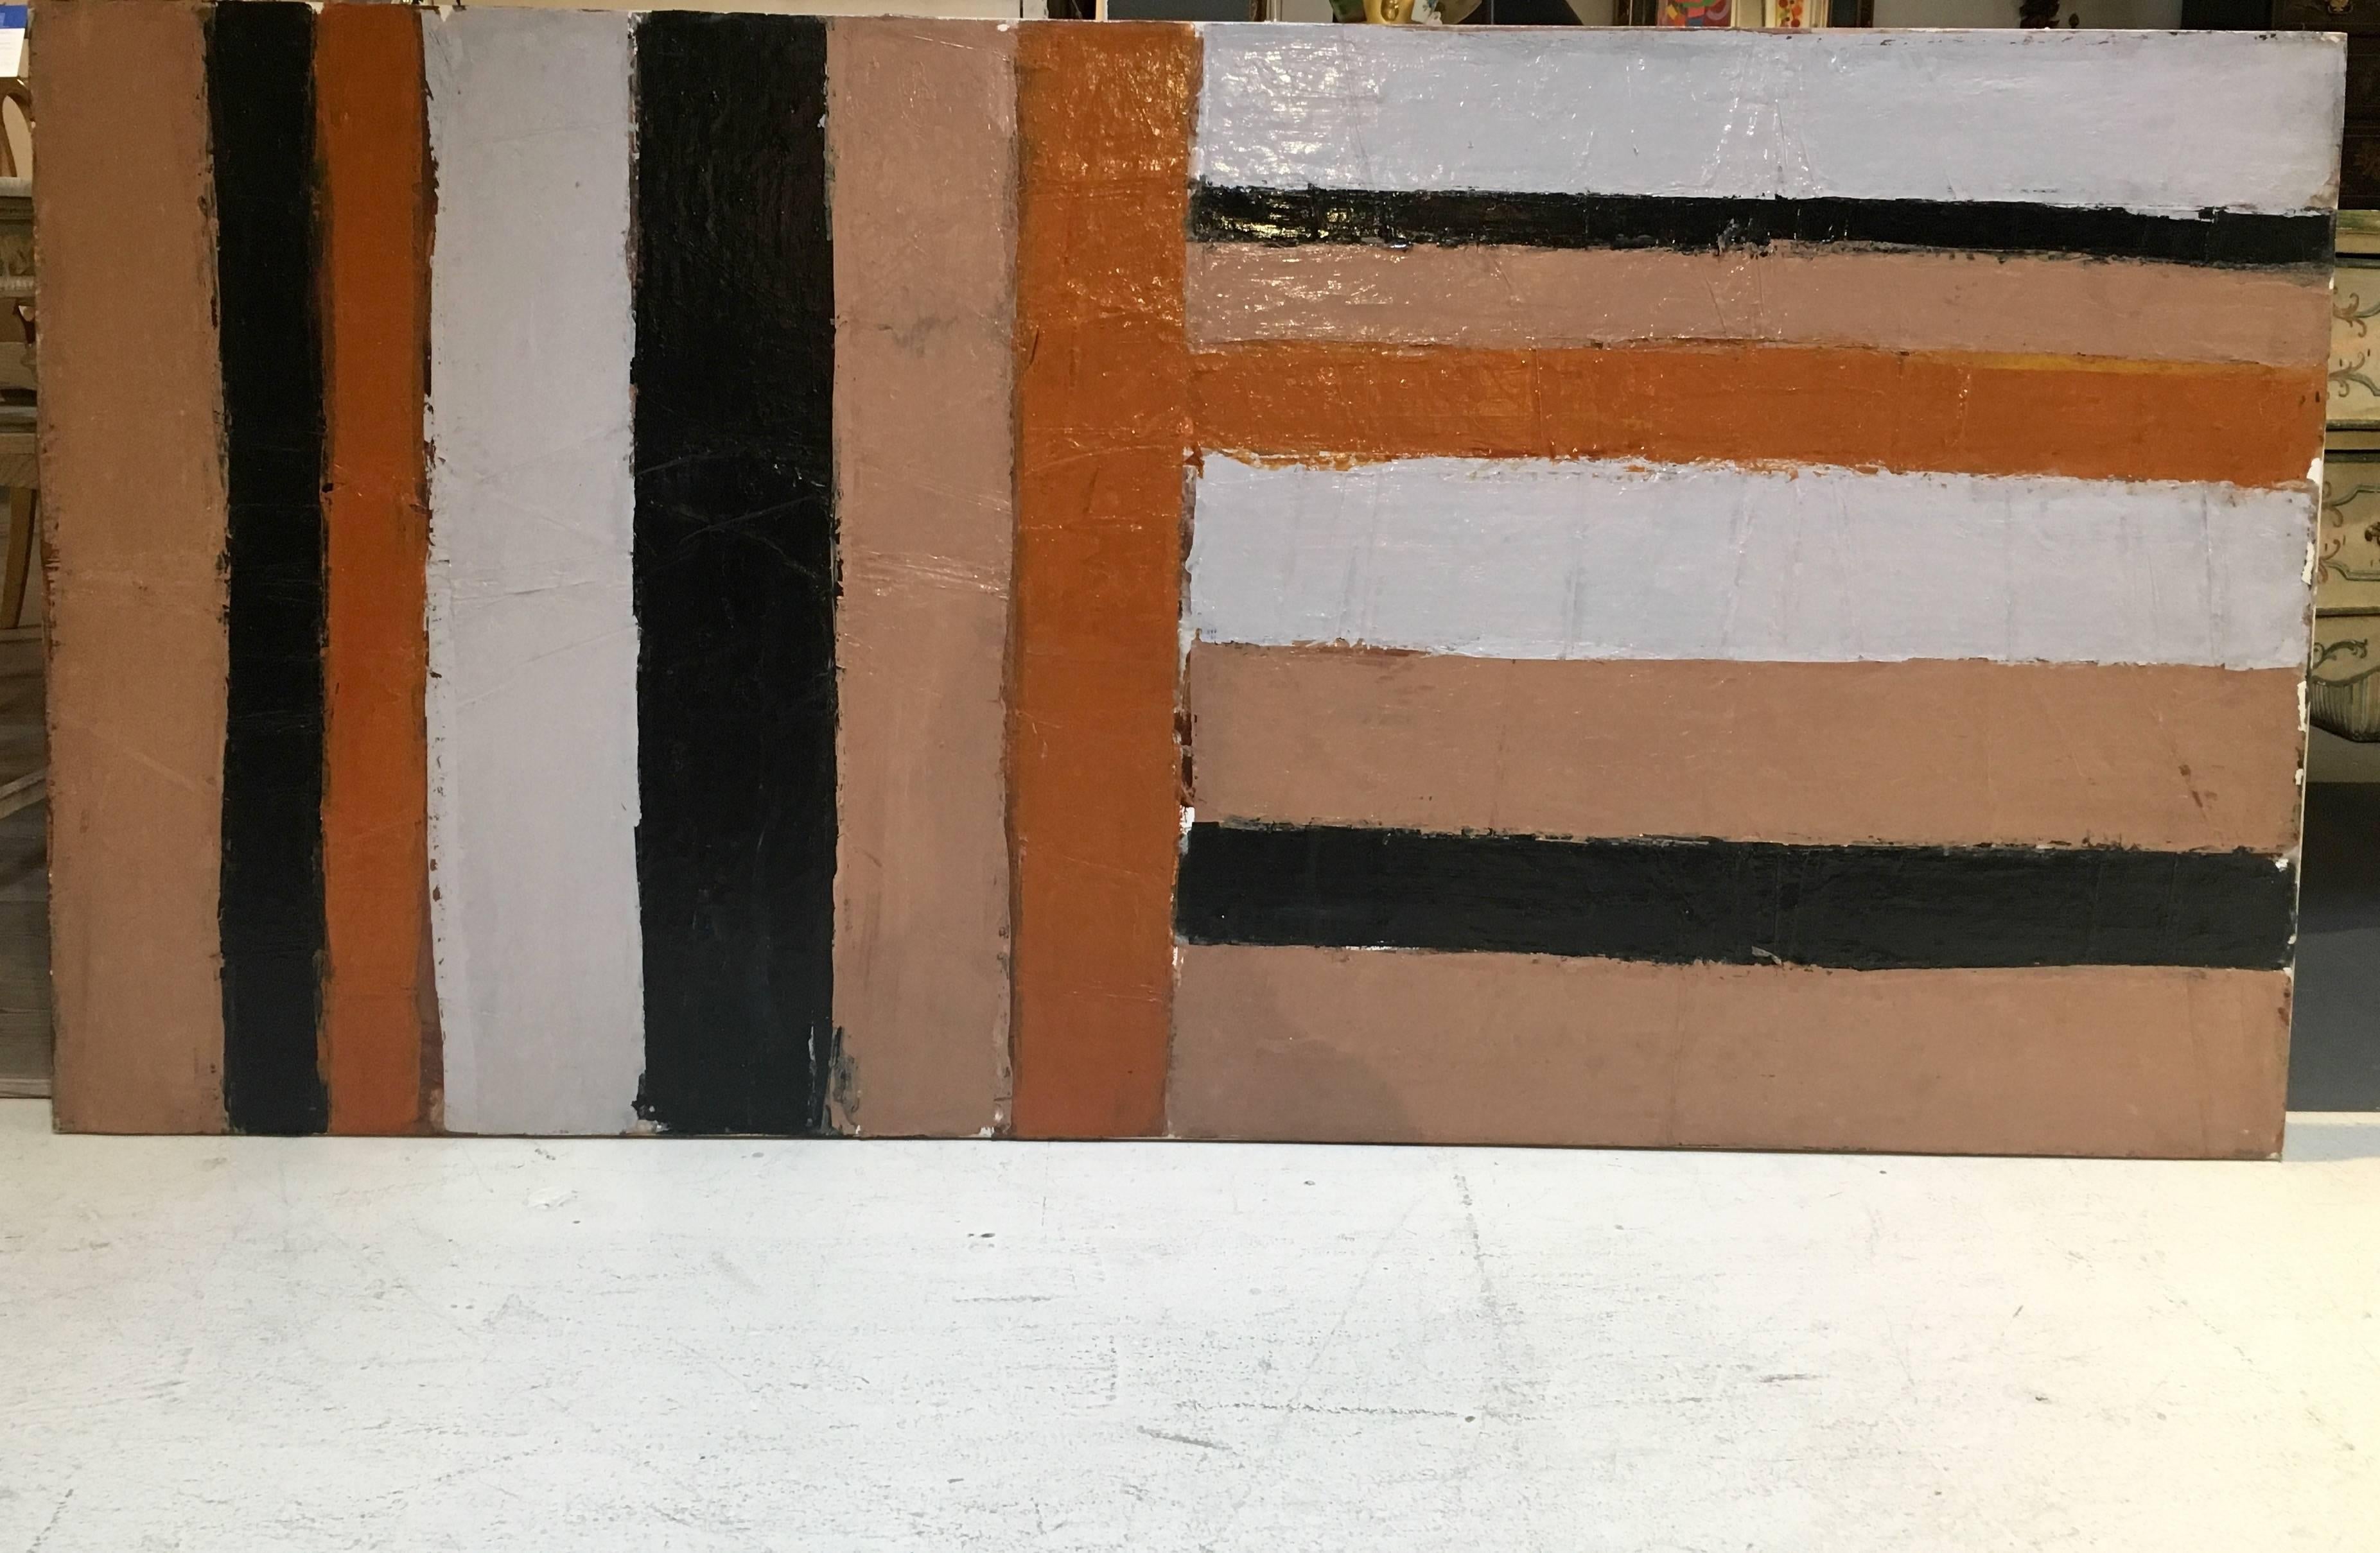 Canvas Hard Edge, Large-Scale Abstract Oil Painting, by Artist Abe Lubelski, 1979